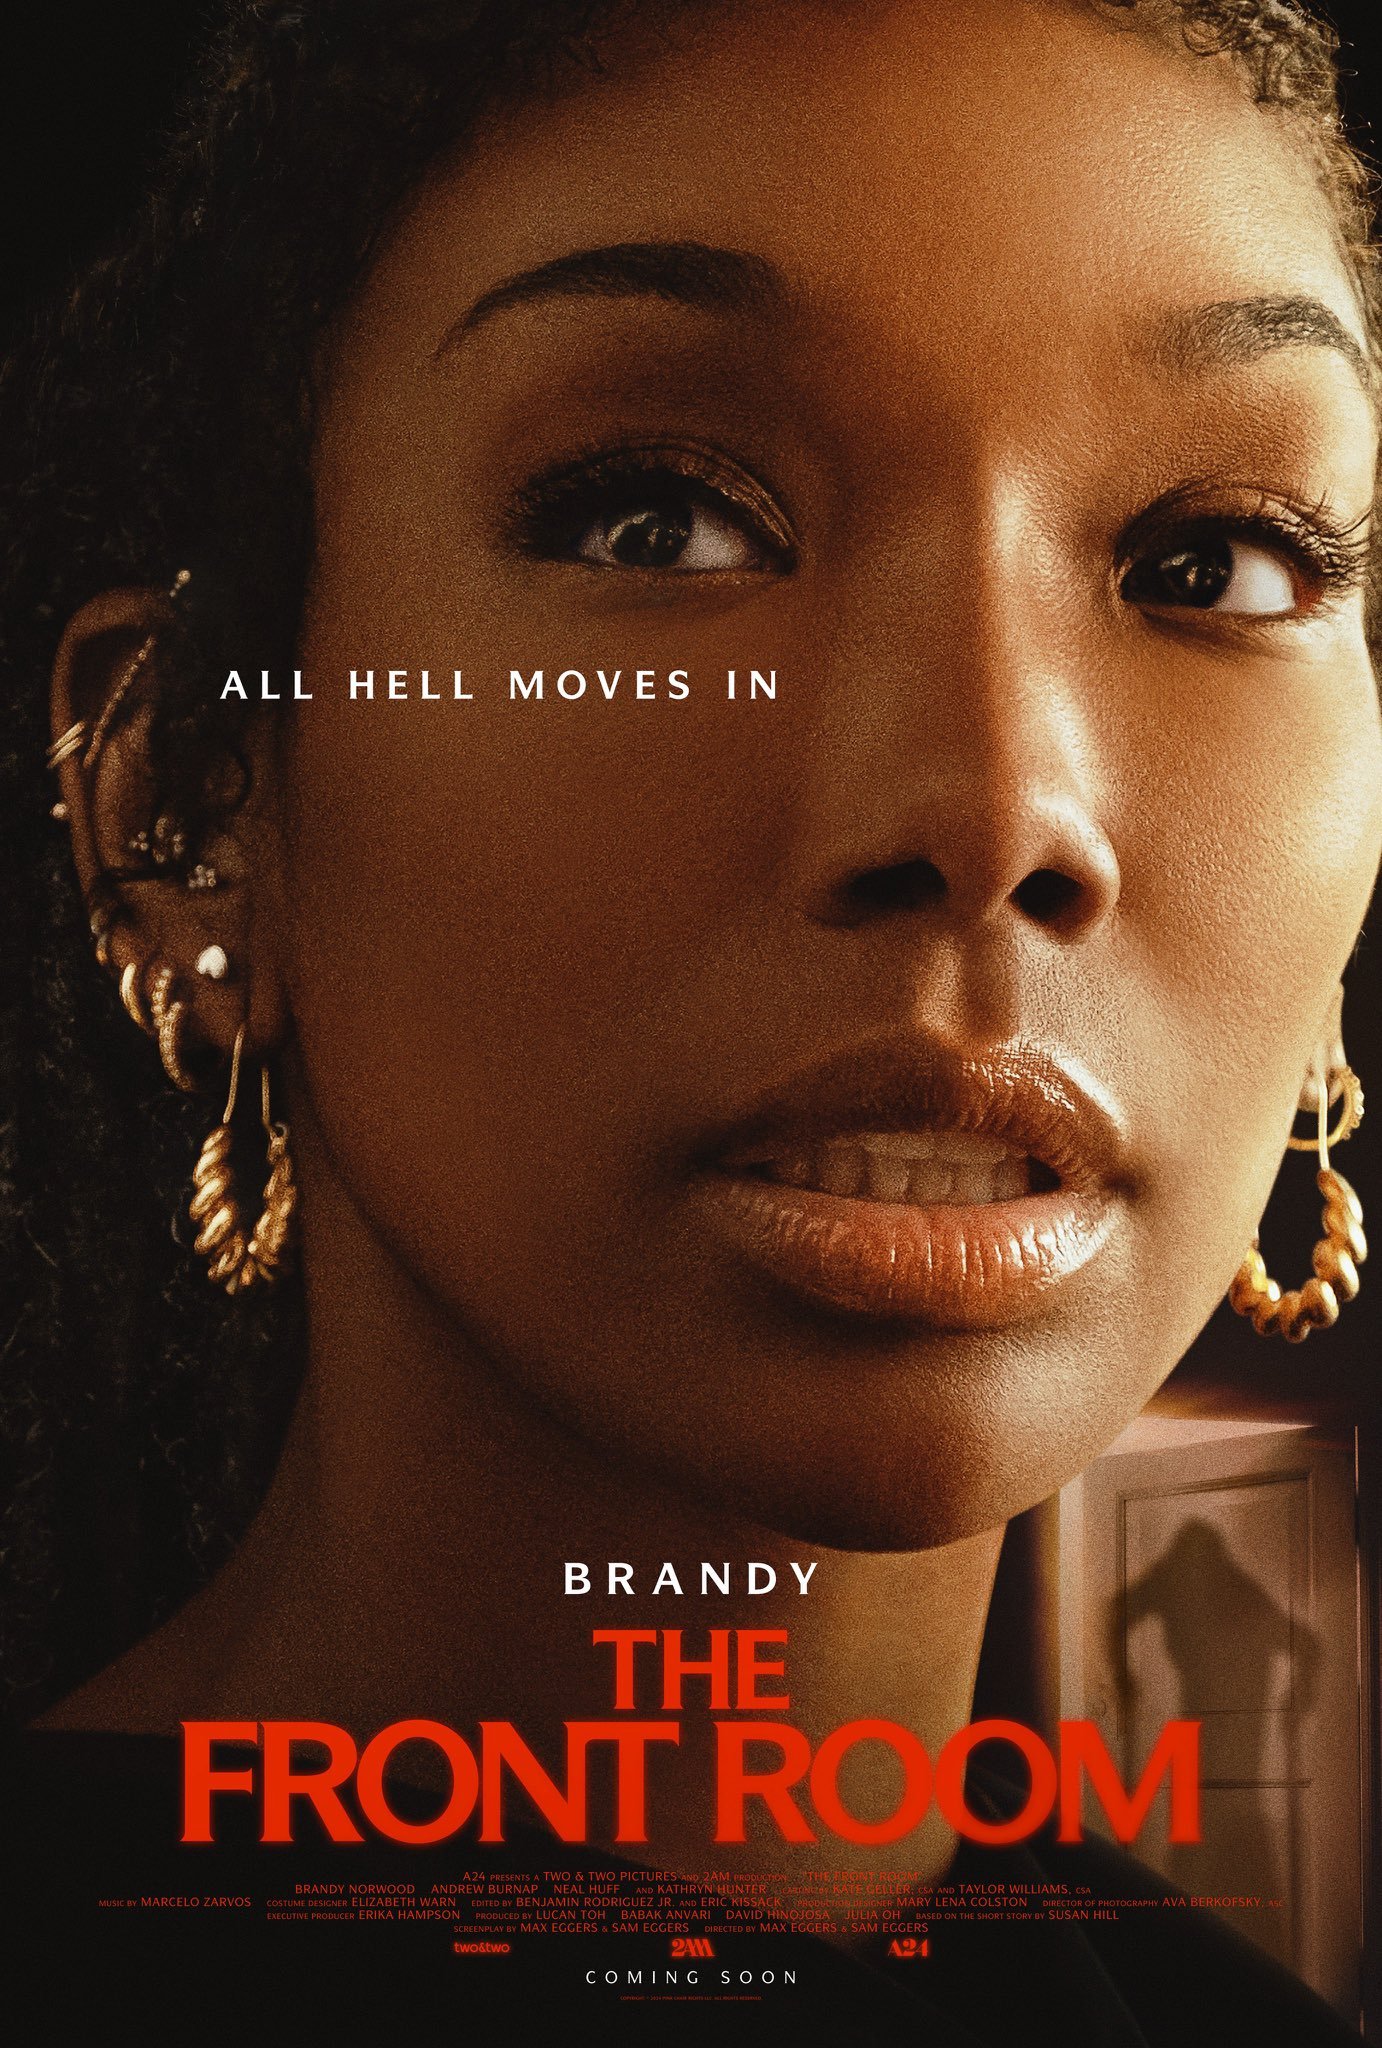 The poster for ‘The Front Room’ starring Brandy is here!